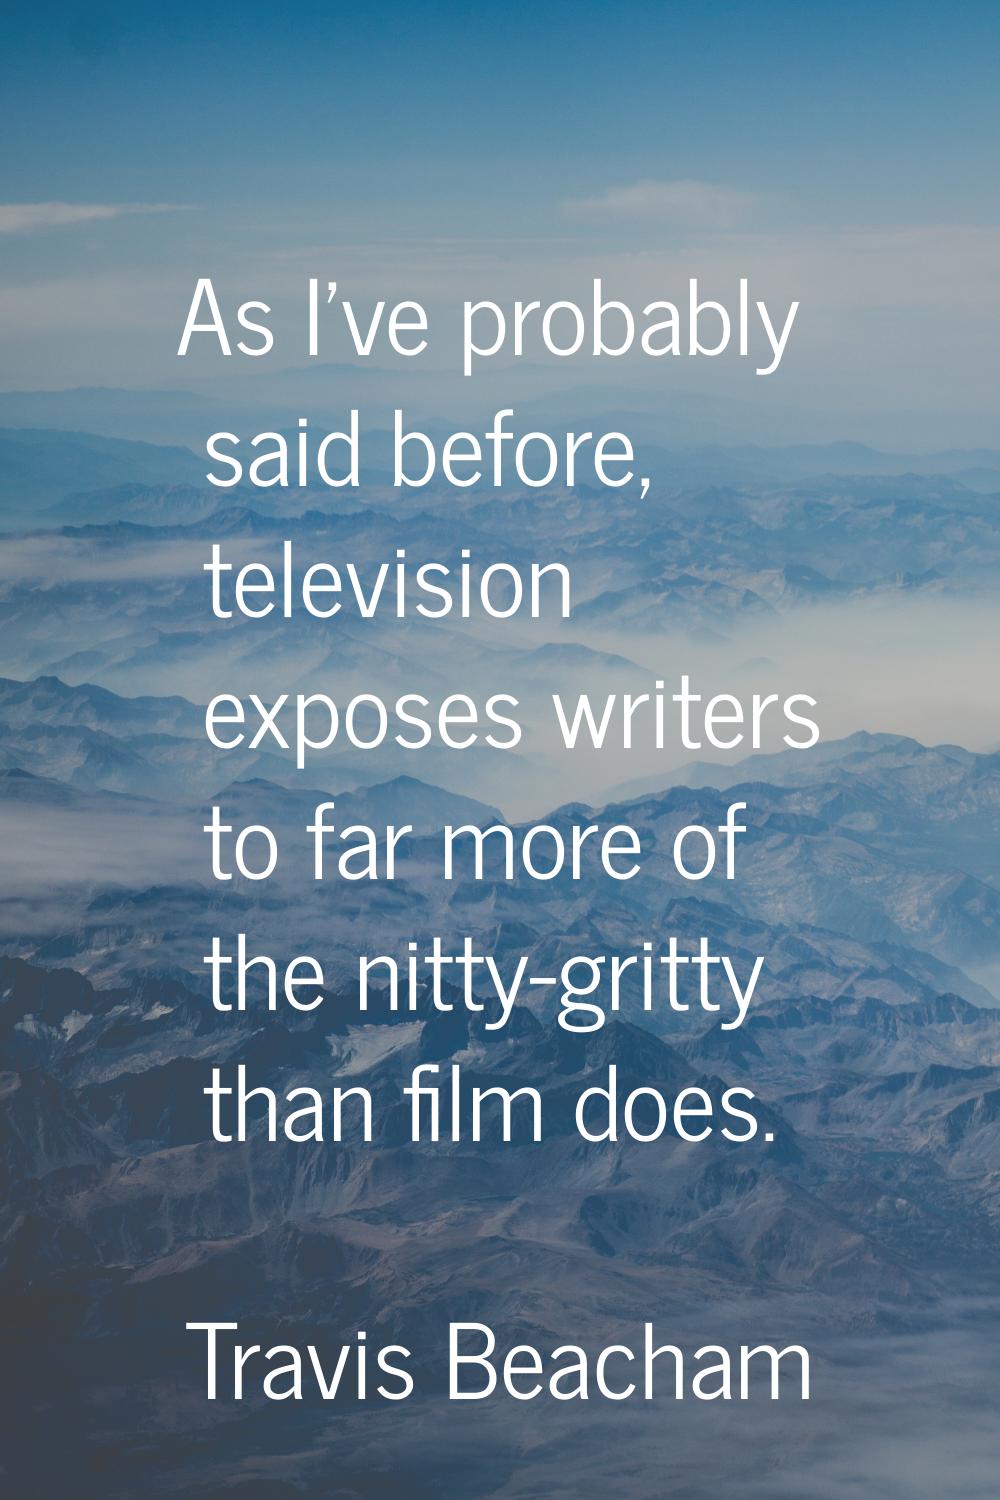 As I've probably said before, television exposes writers to far more of the nitty-gritty than film 